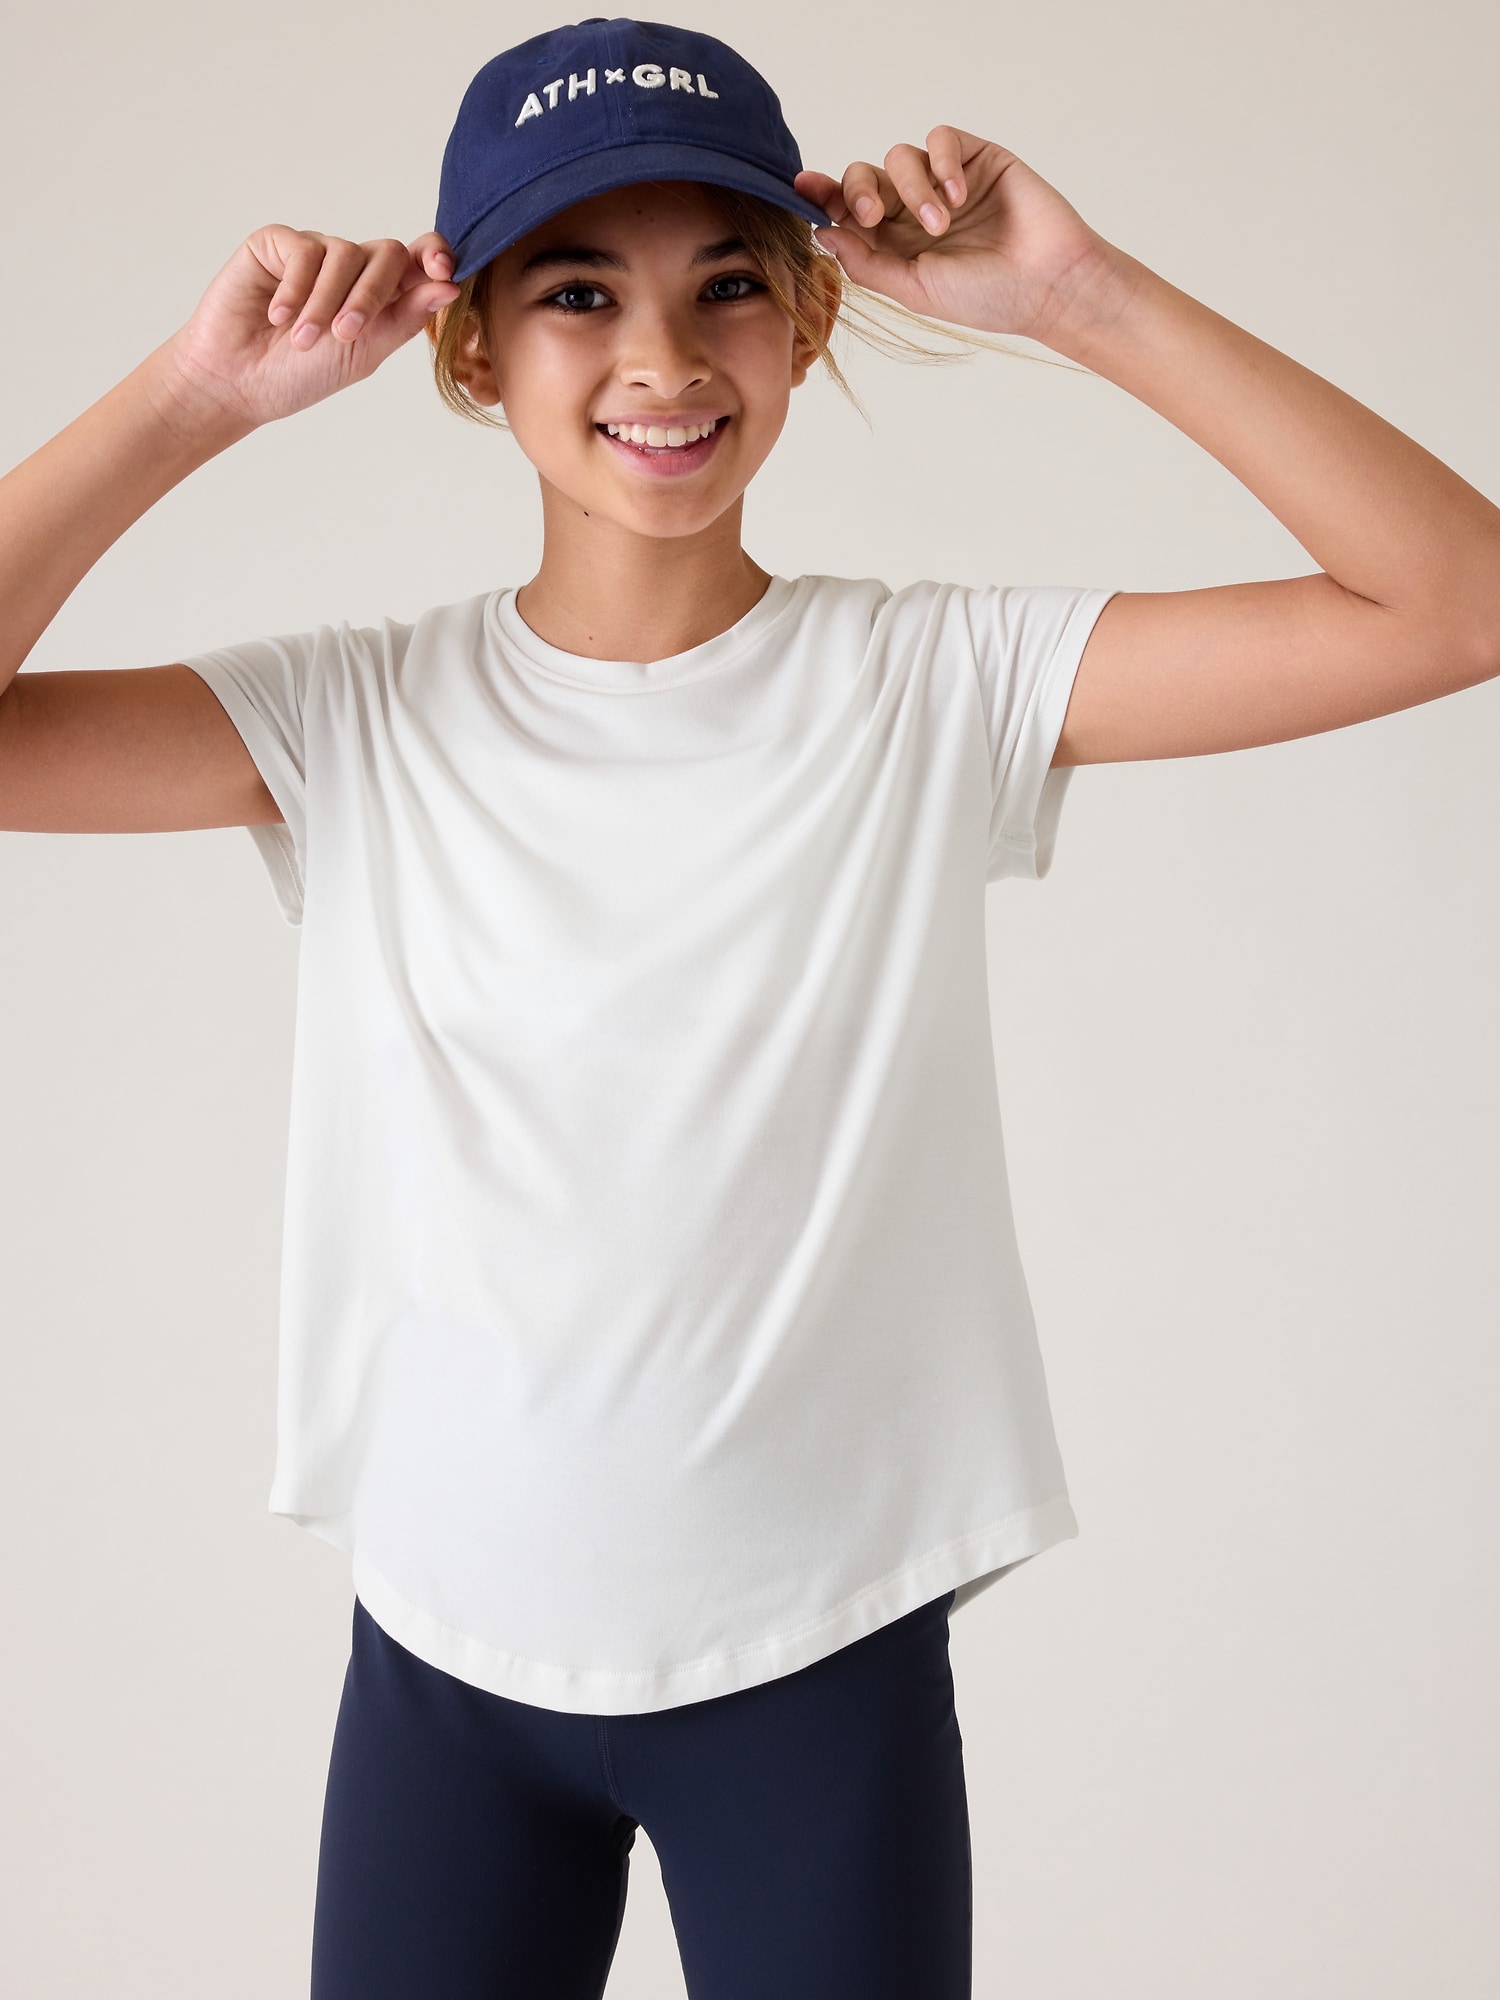 T-shirt With Ease Athleta Girl